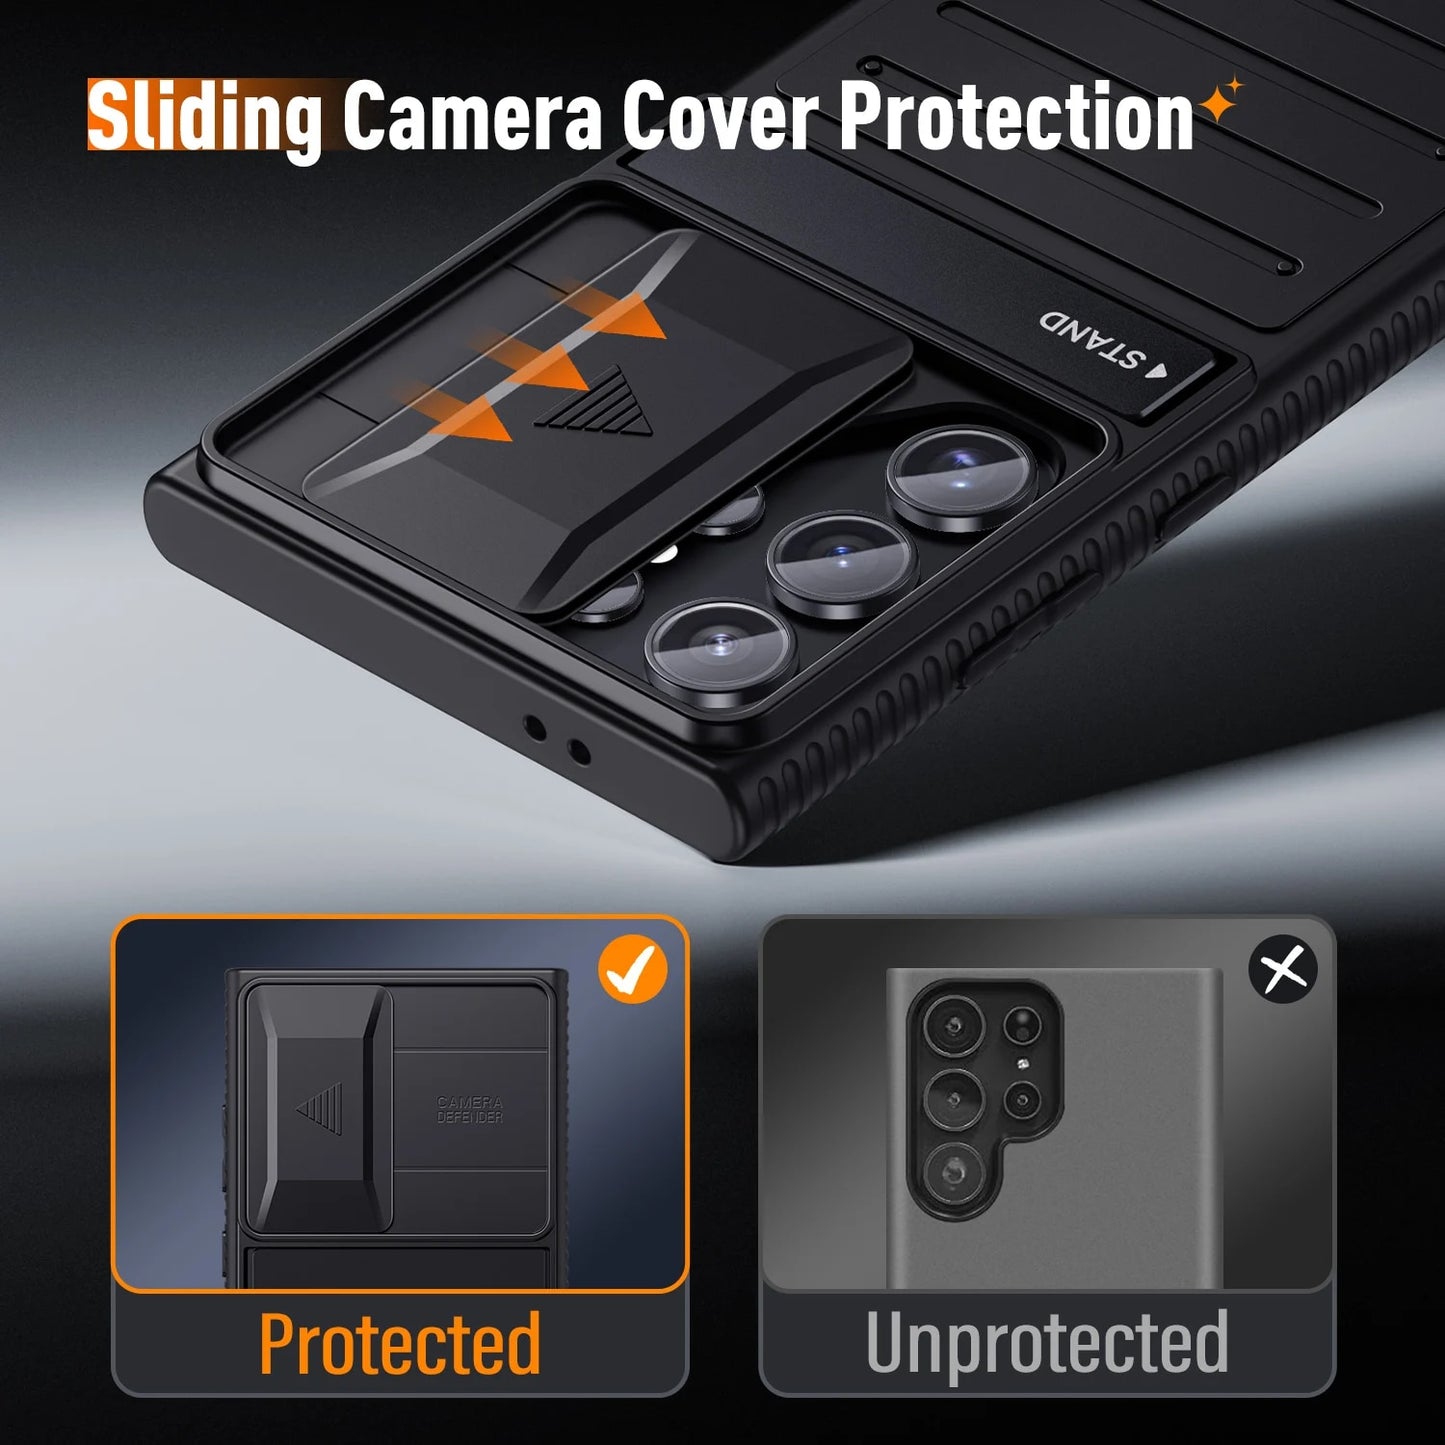 Samsung Galaxy S24 Ultra Case: Full-Body Shockproof Design, Dual-Layer Armor, Stand Cover, and Slide Camera Protector